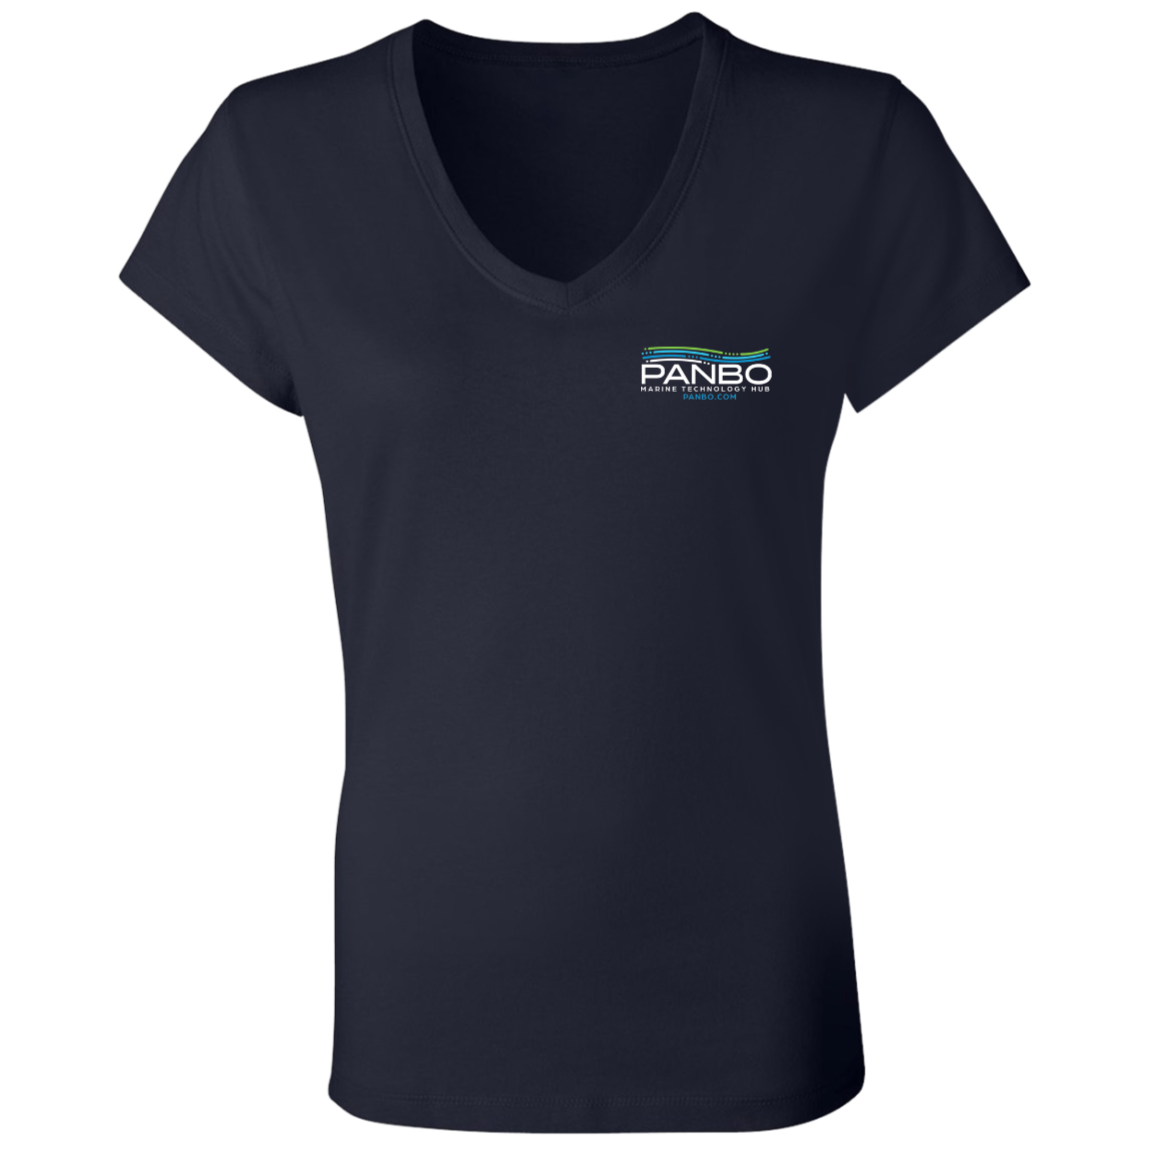 Panbo - Bella and Canvas Women's V-Neck Logo T-Shirt